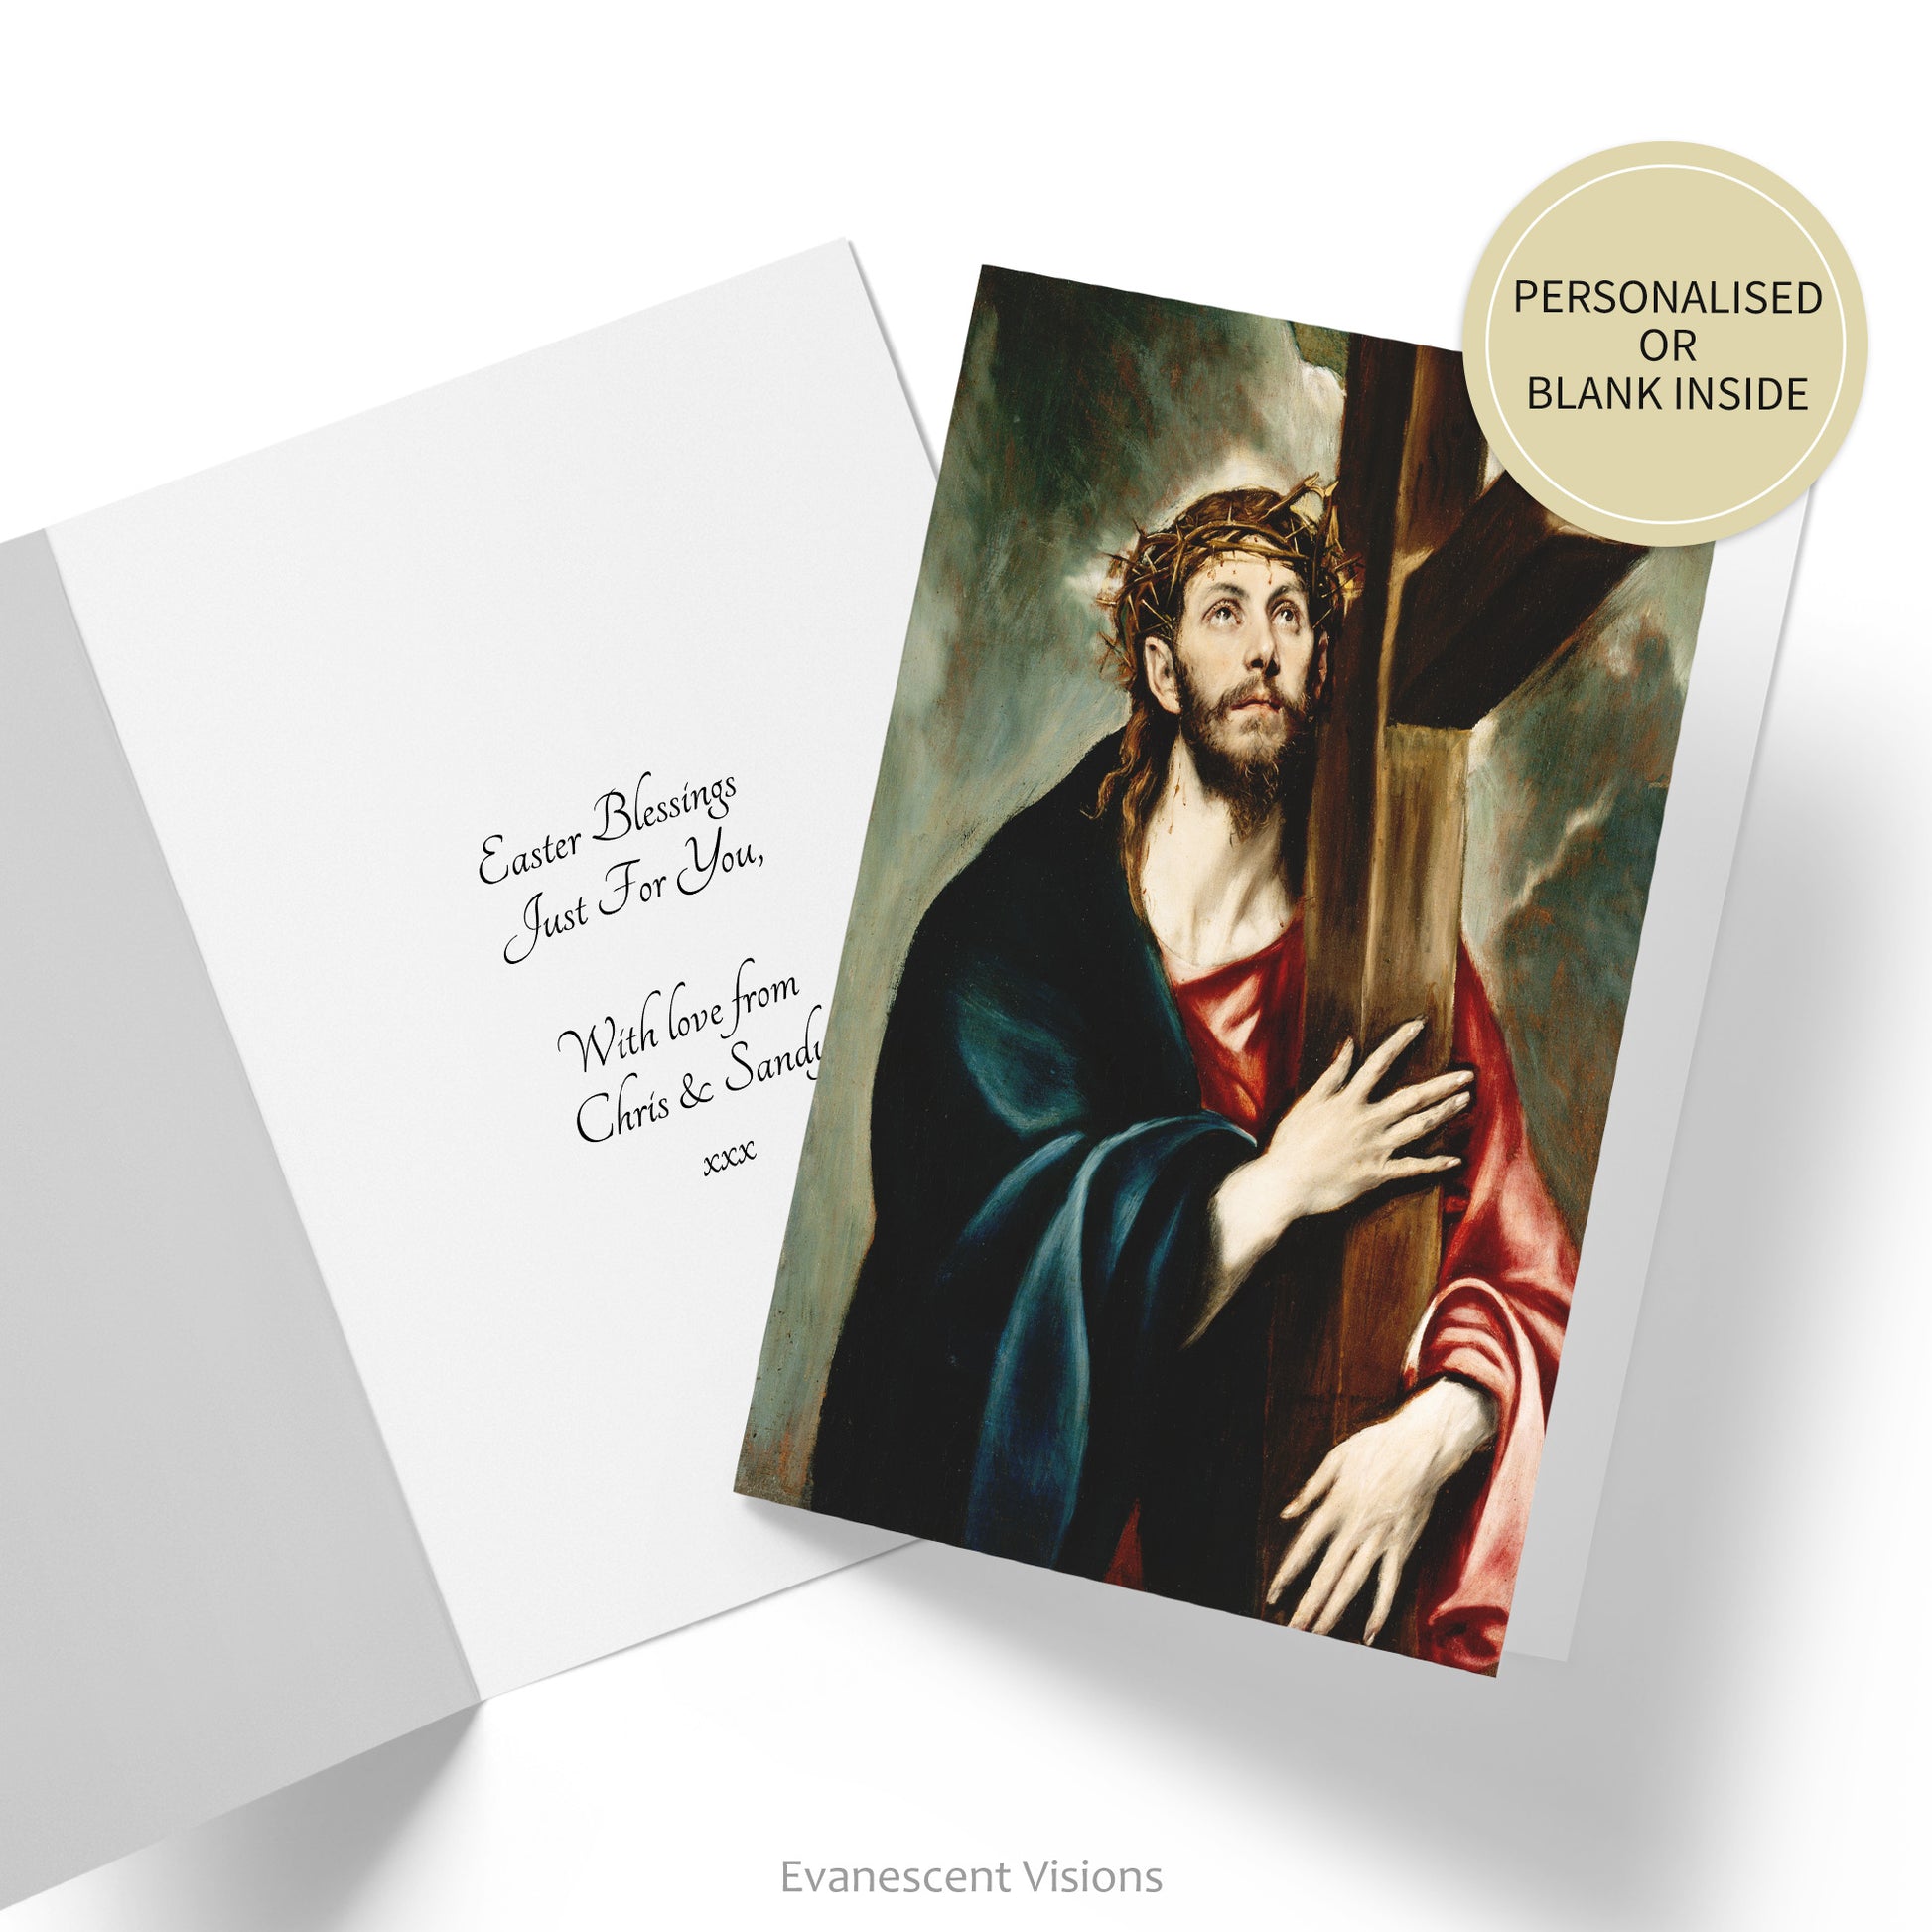 Card with image from the painting 'Christ Carrying the Cross' by El Greco. Inside of card shown with custom greeting.